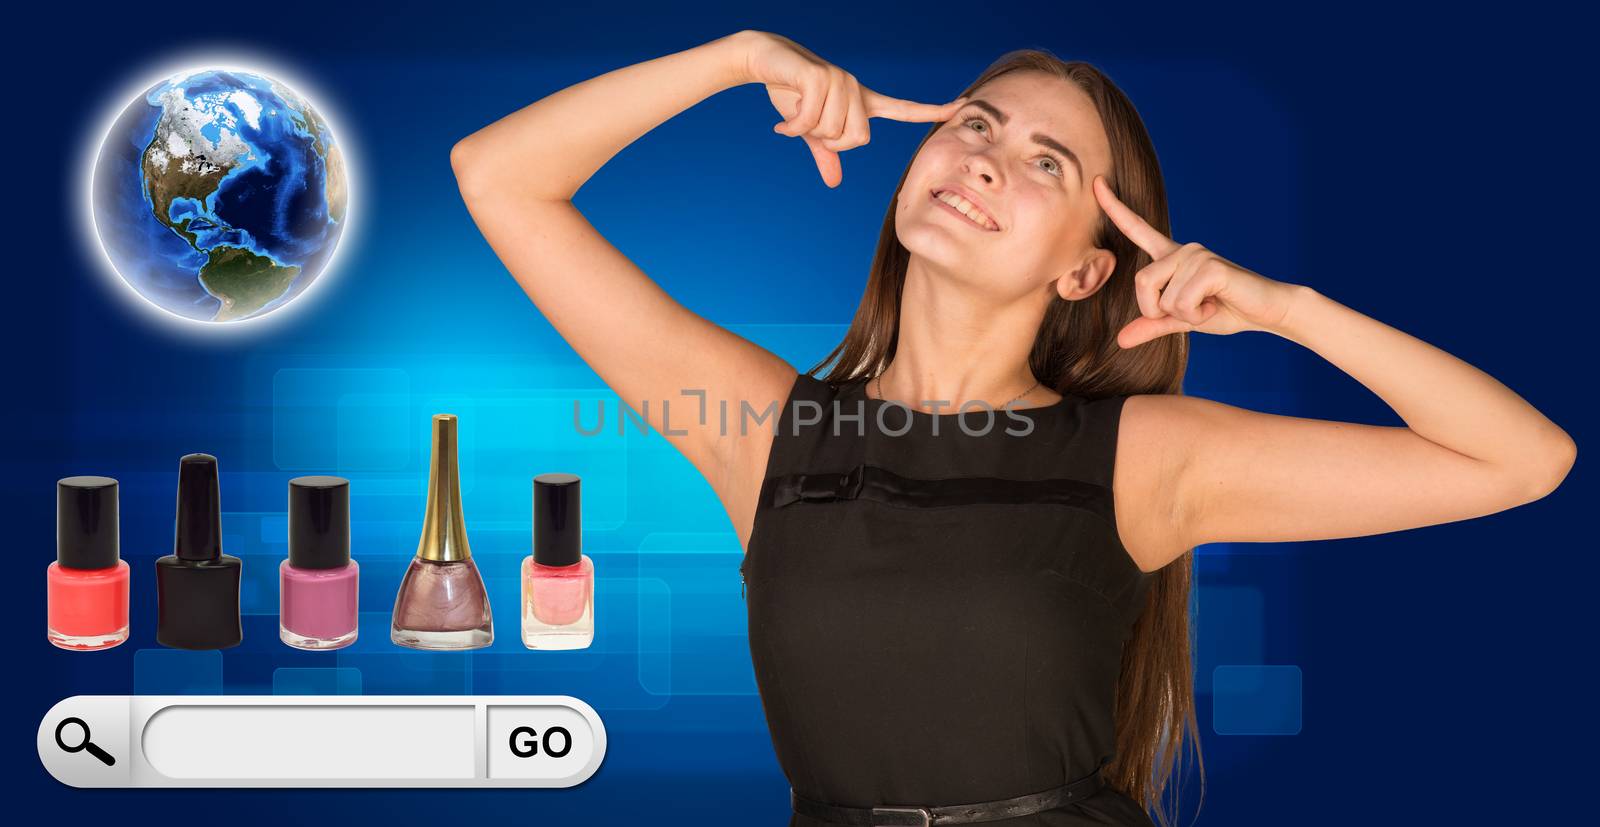 Beautiful woman facing choice. bottles of nail polish, Globe and search bar with Go button beside. On blue background. Element of this image furnished by NASA 